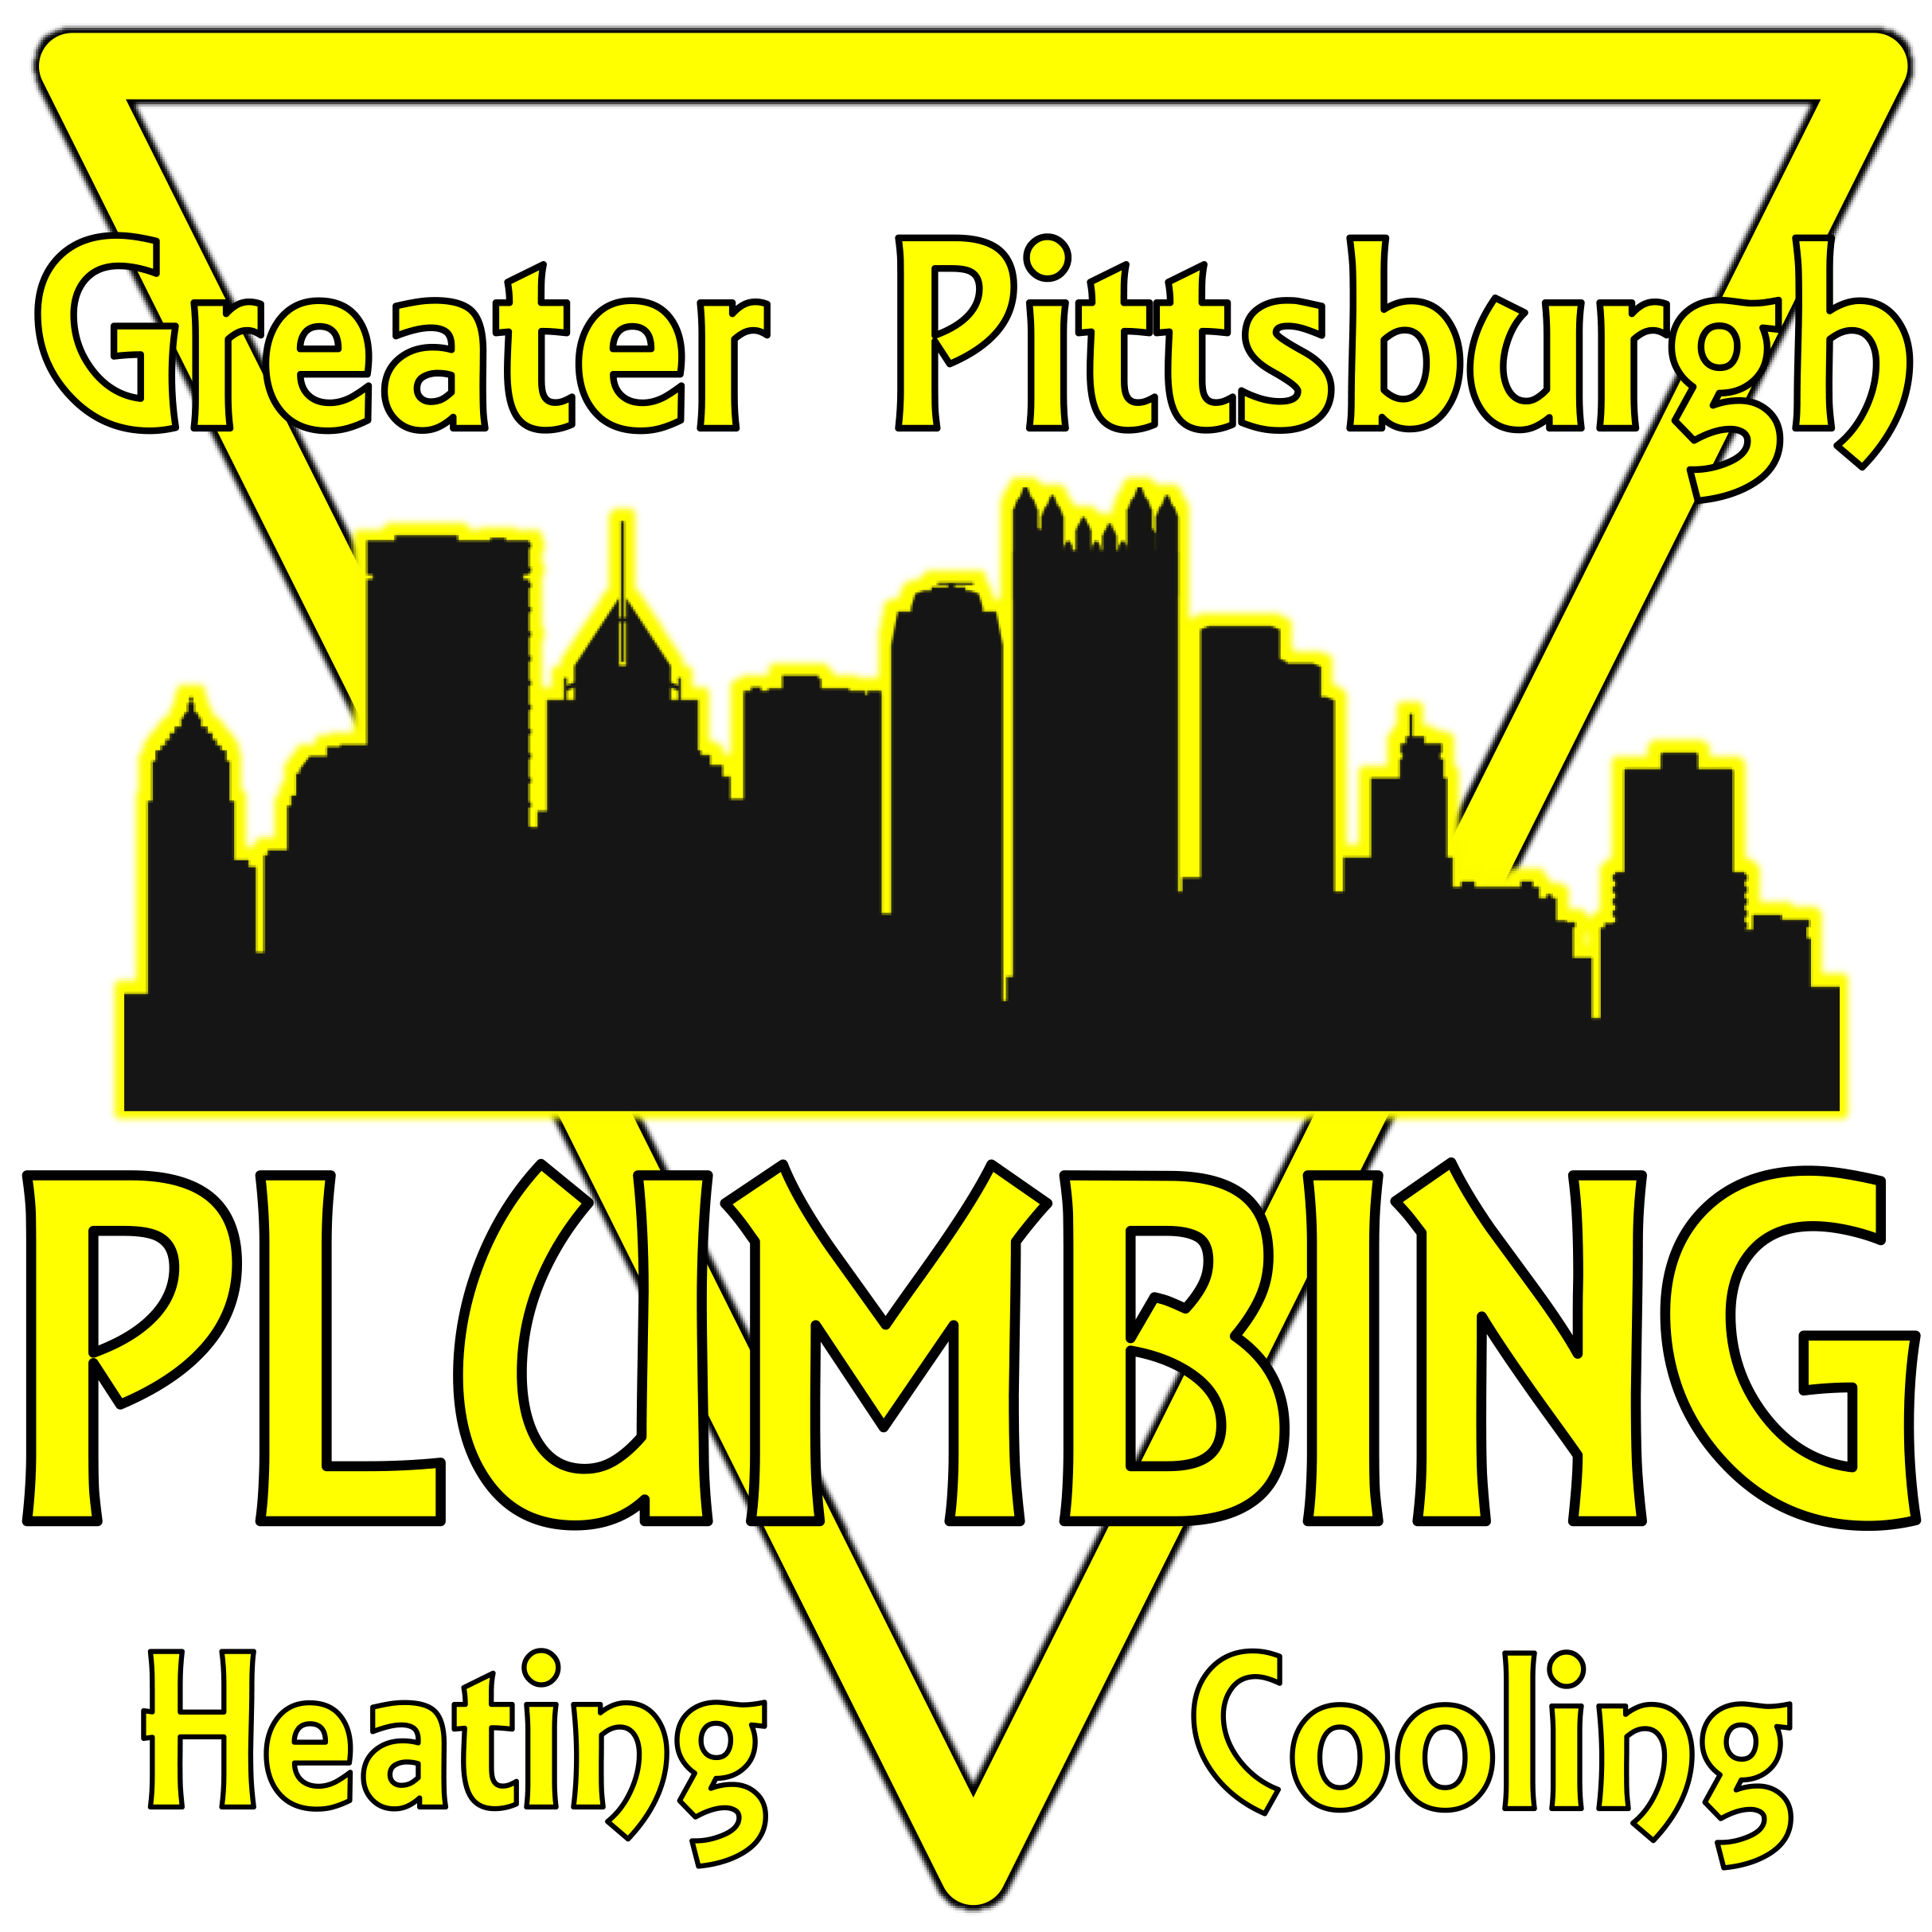 Greater Pittsburgh Plumbing, Heating & Cooling